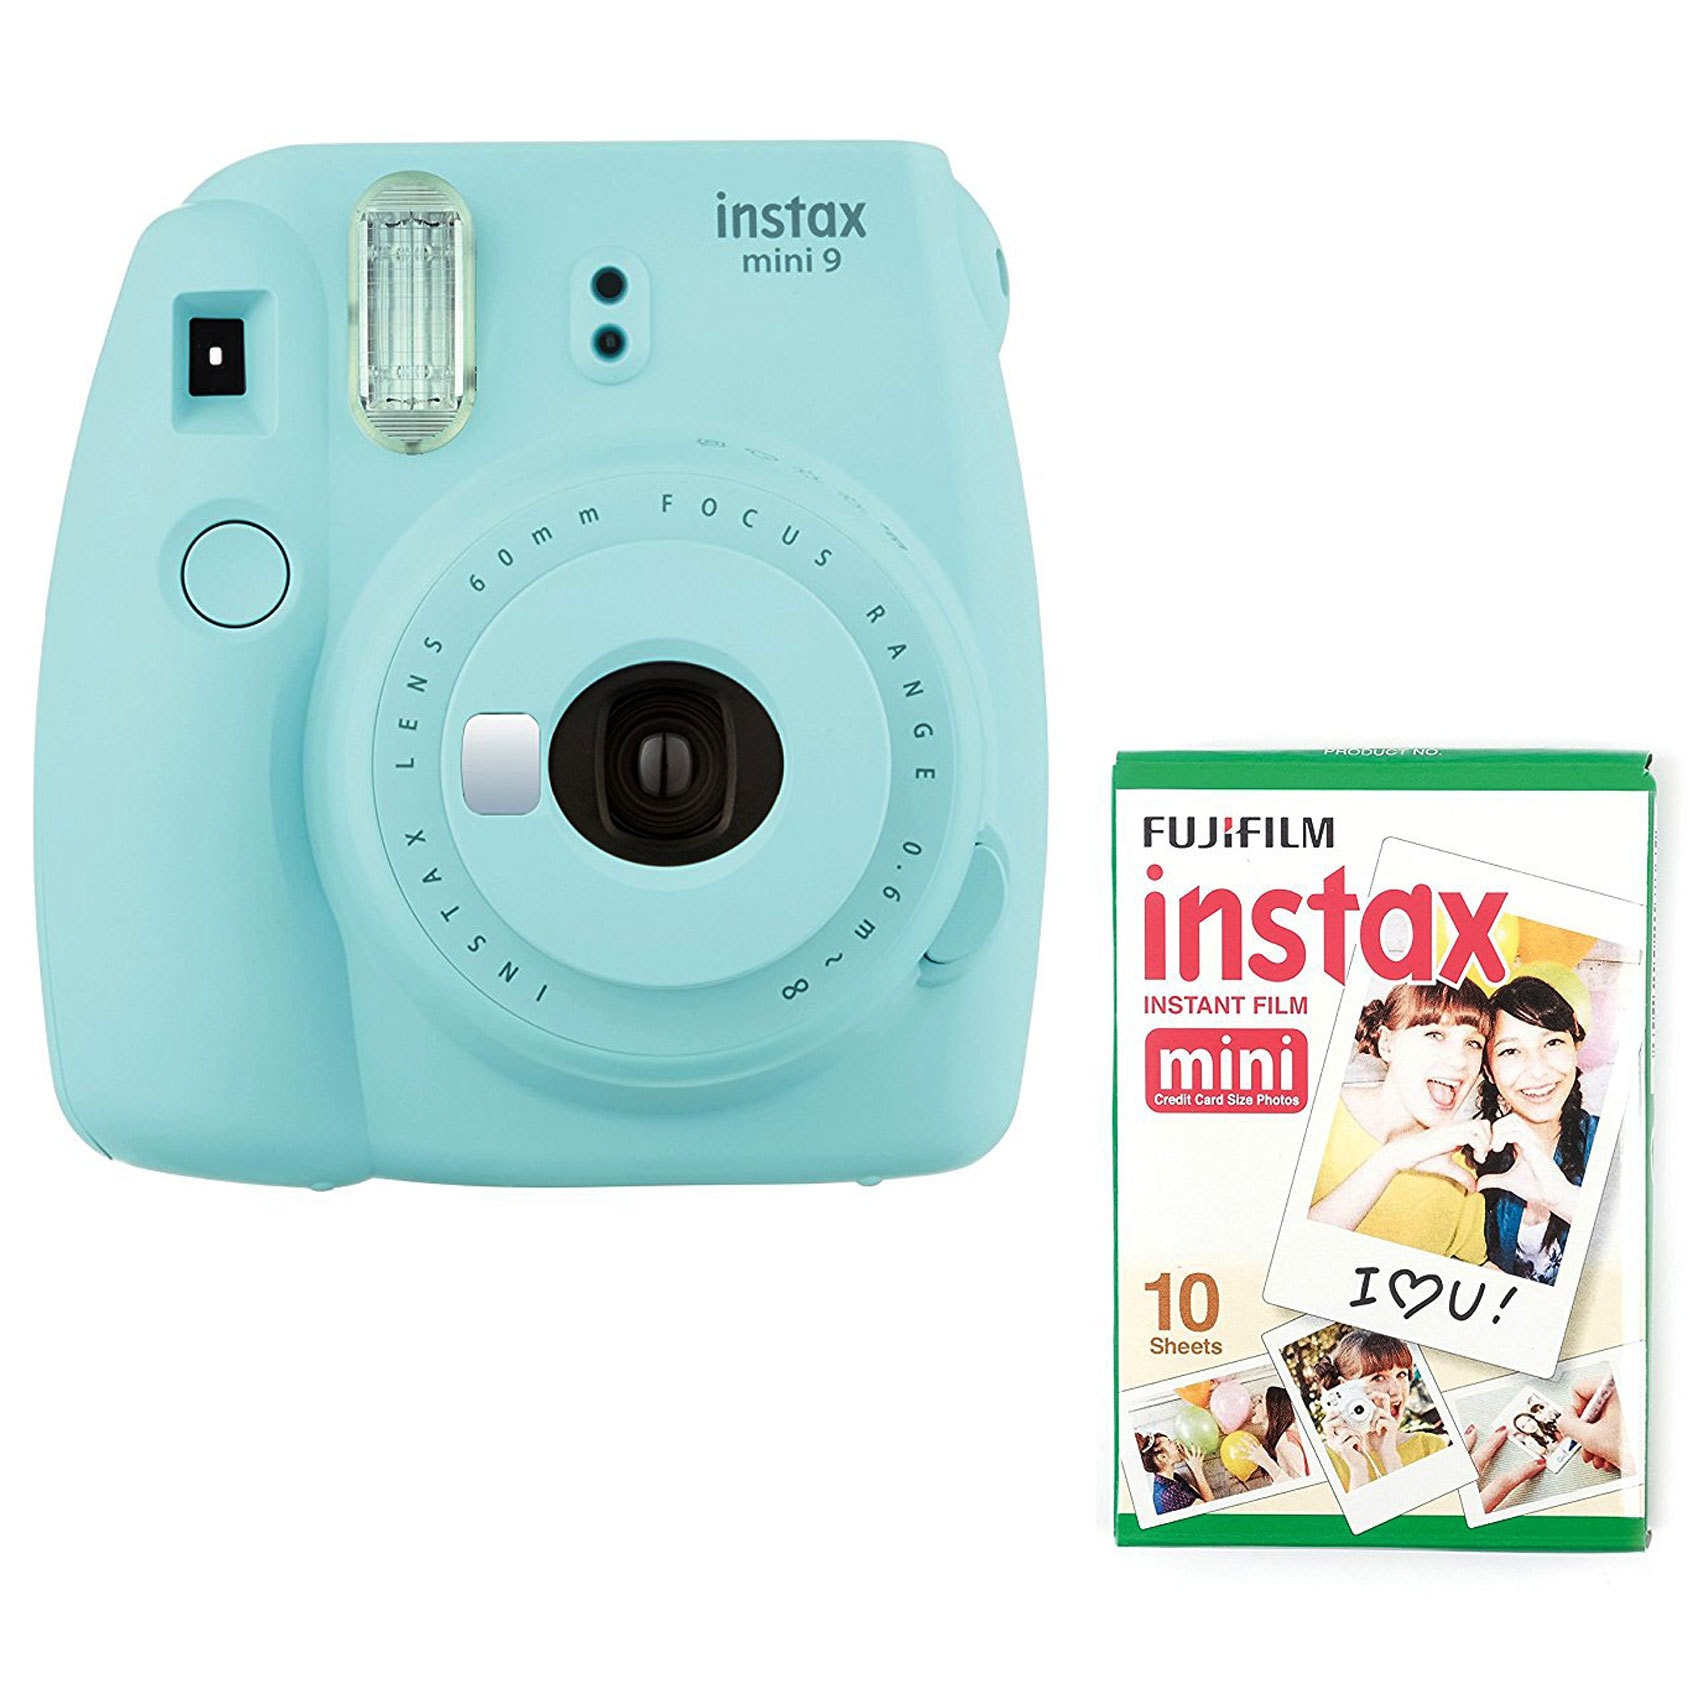 Fujifilm instax mini 8 instant point and shoot camera blue Buy Fujifilm Camera Instax Mini 9 Ice Blue Single Pack Film Online Shop Electronics Appliances On Carrefour Uae